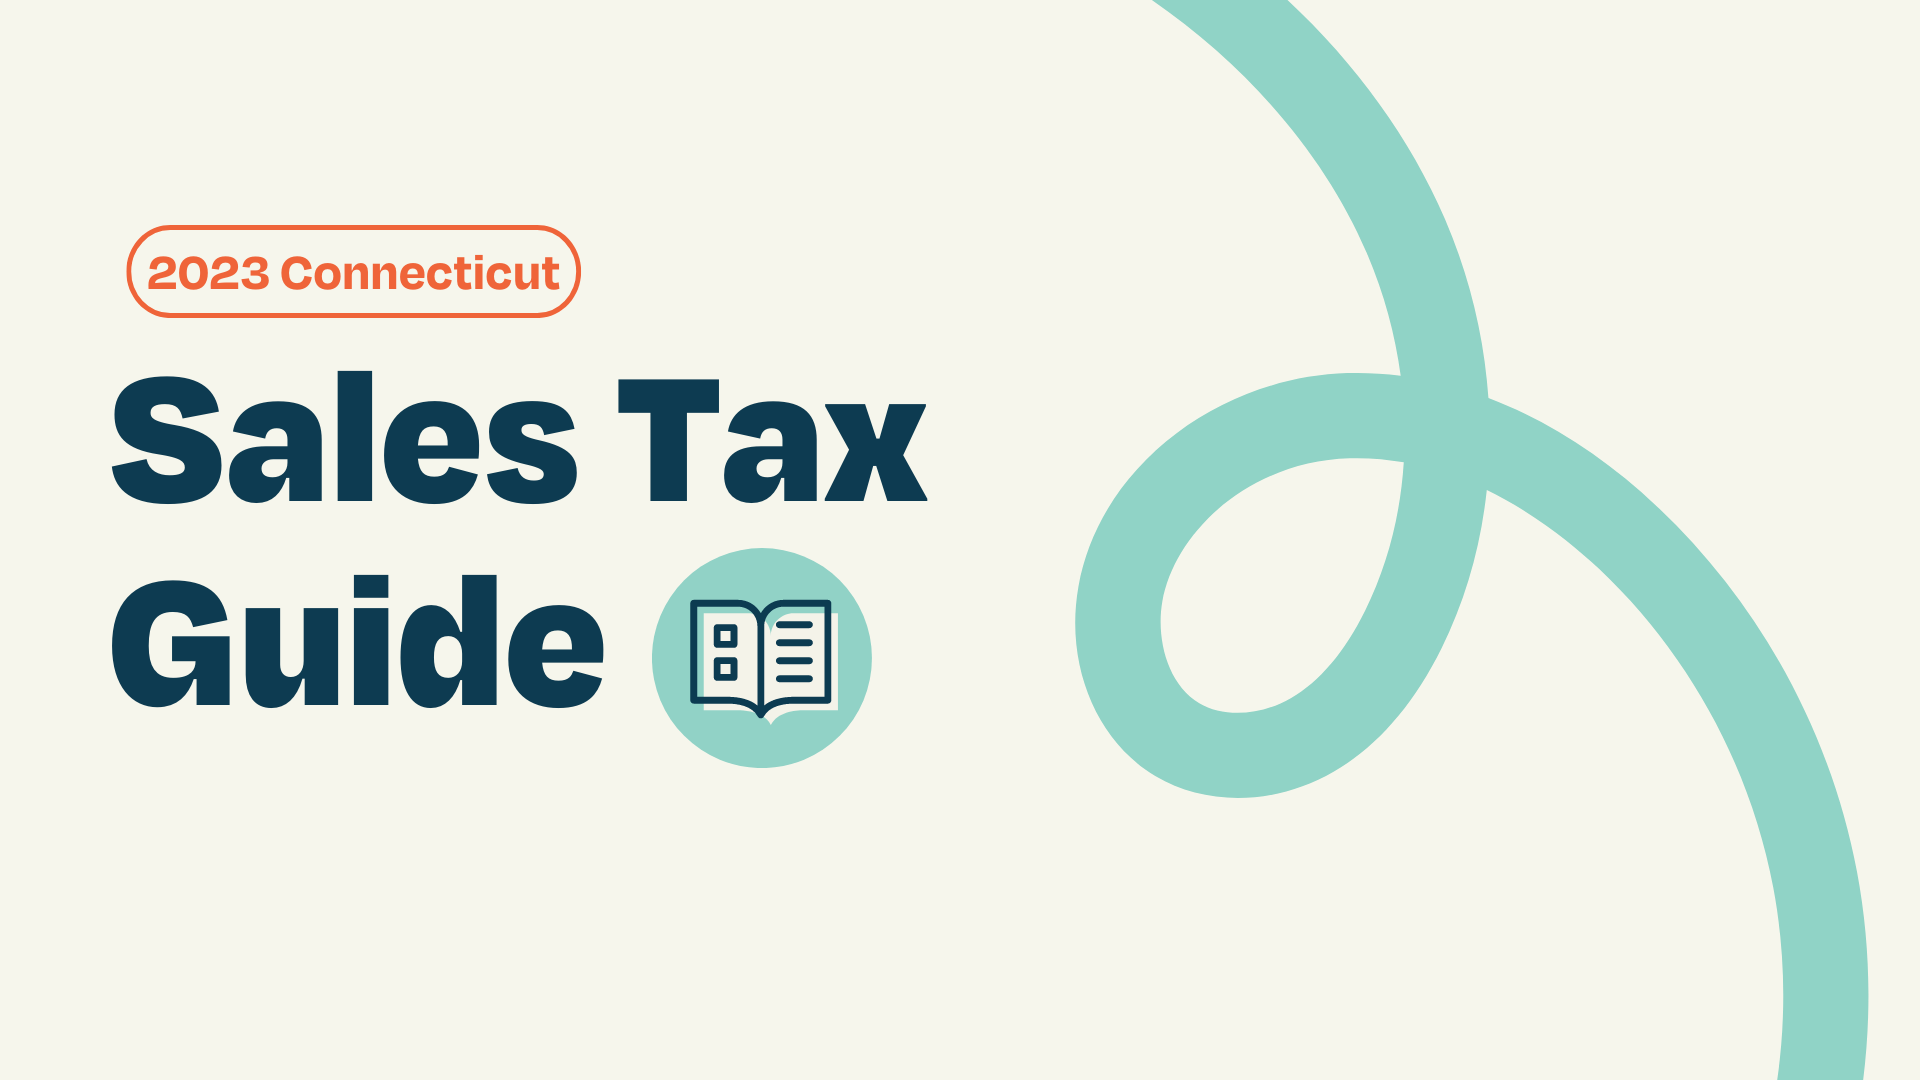 Connecticut 2023 Sales Tax Guide